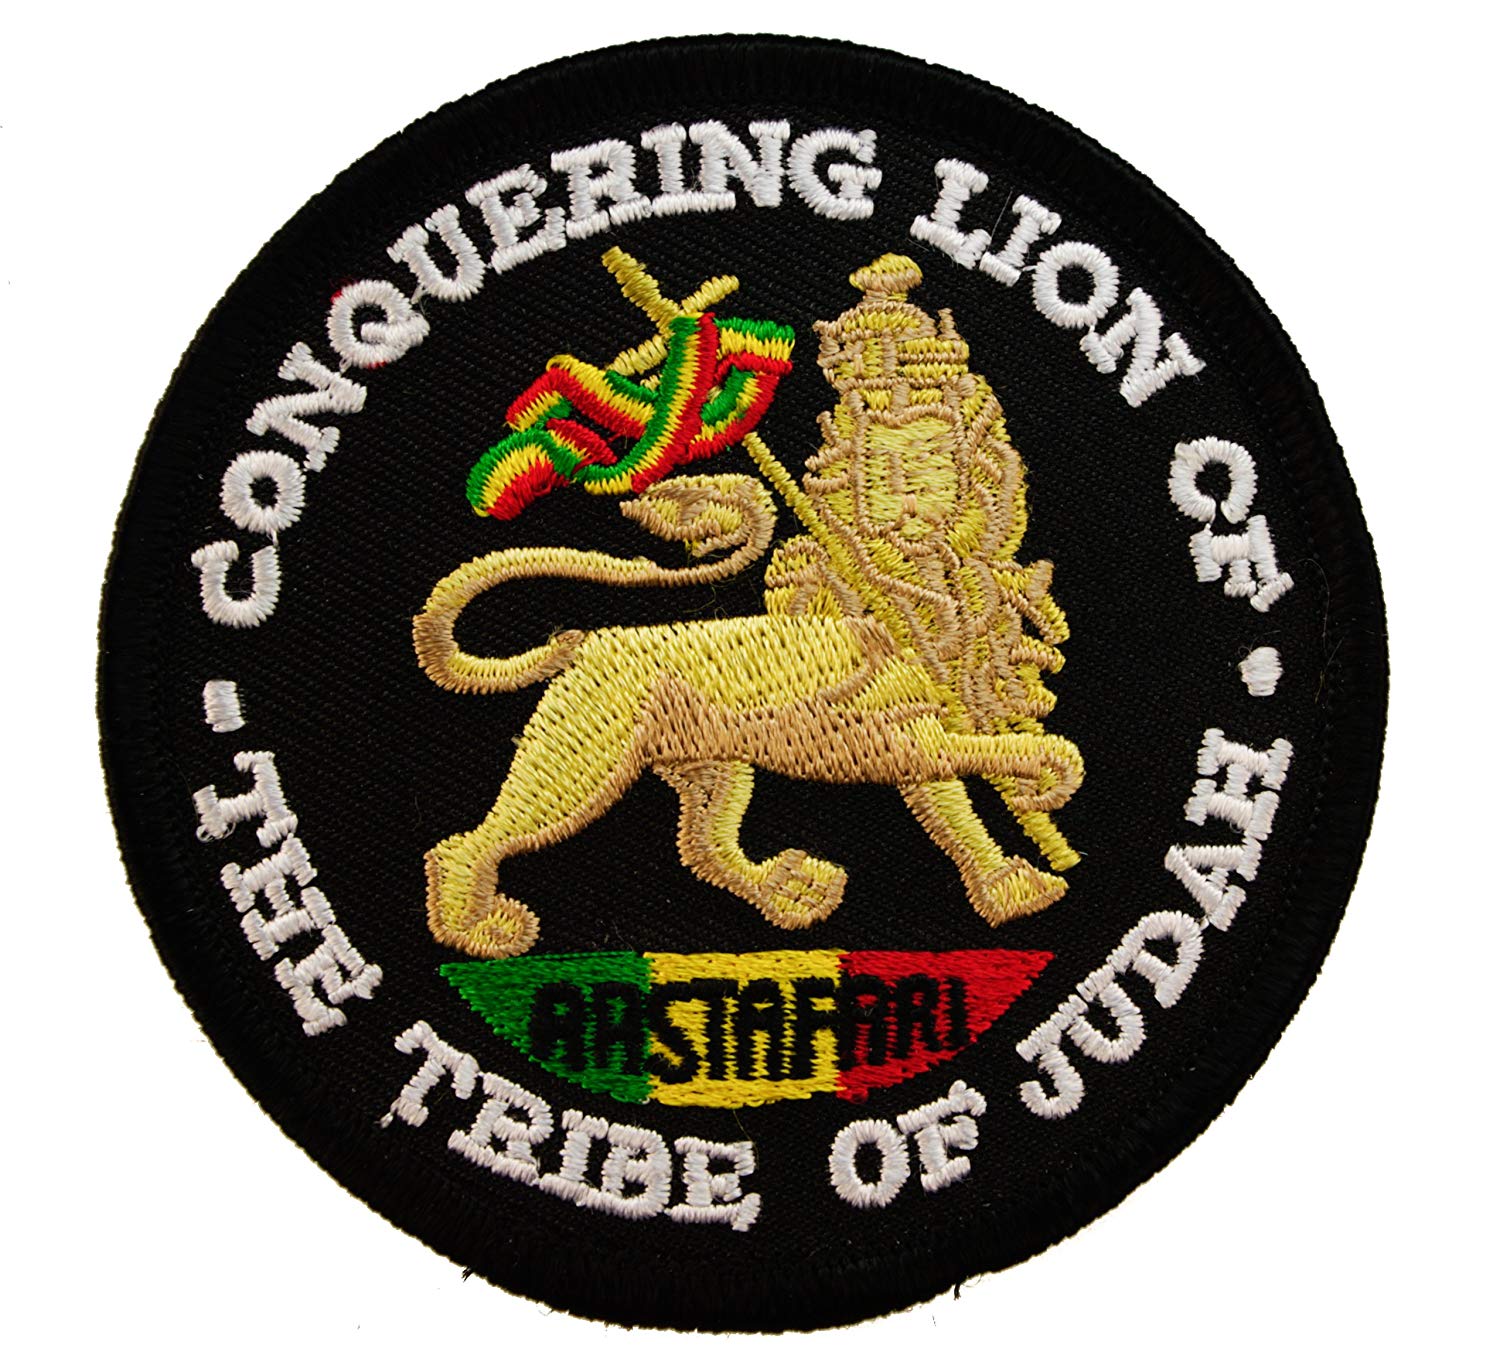 Rastafarian Logo - Rastafari Rastafarian Rasta Conquering Lion of the Tribe of Judah Reggae  Iron on Patch D6